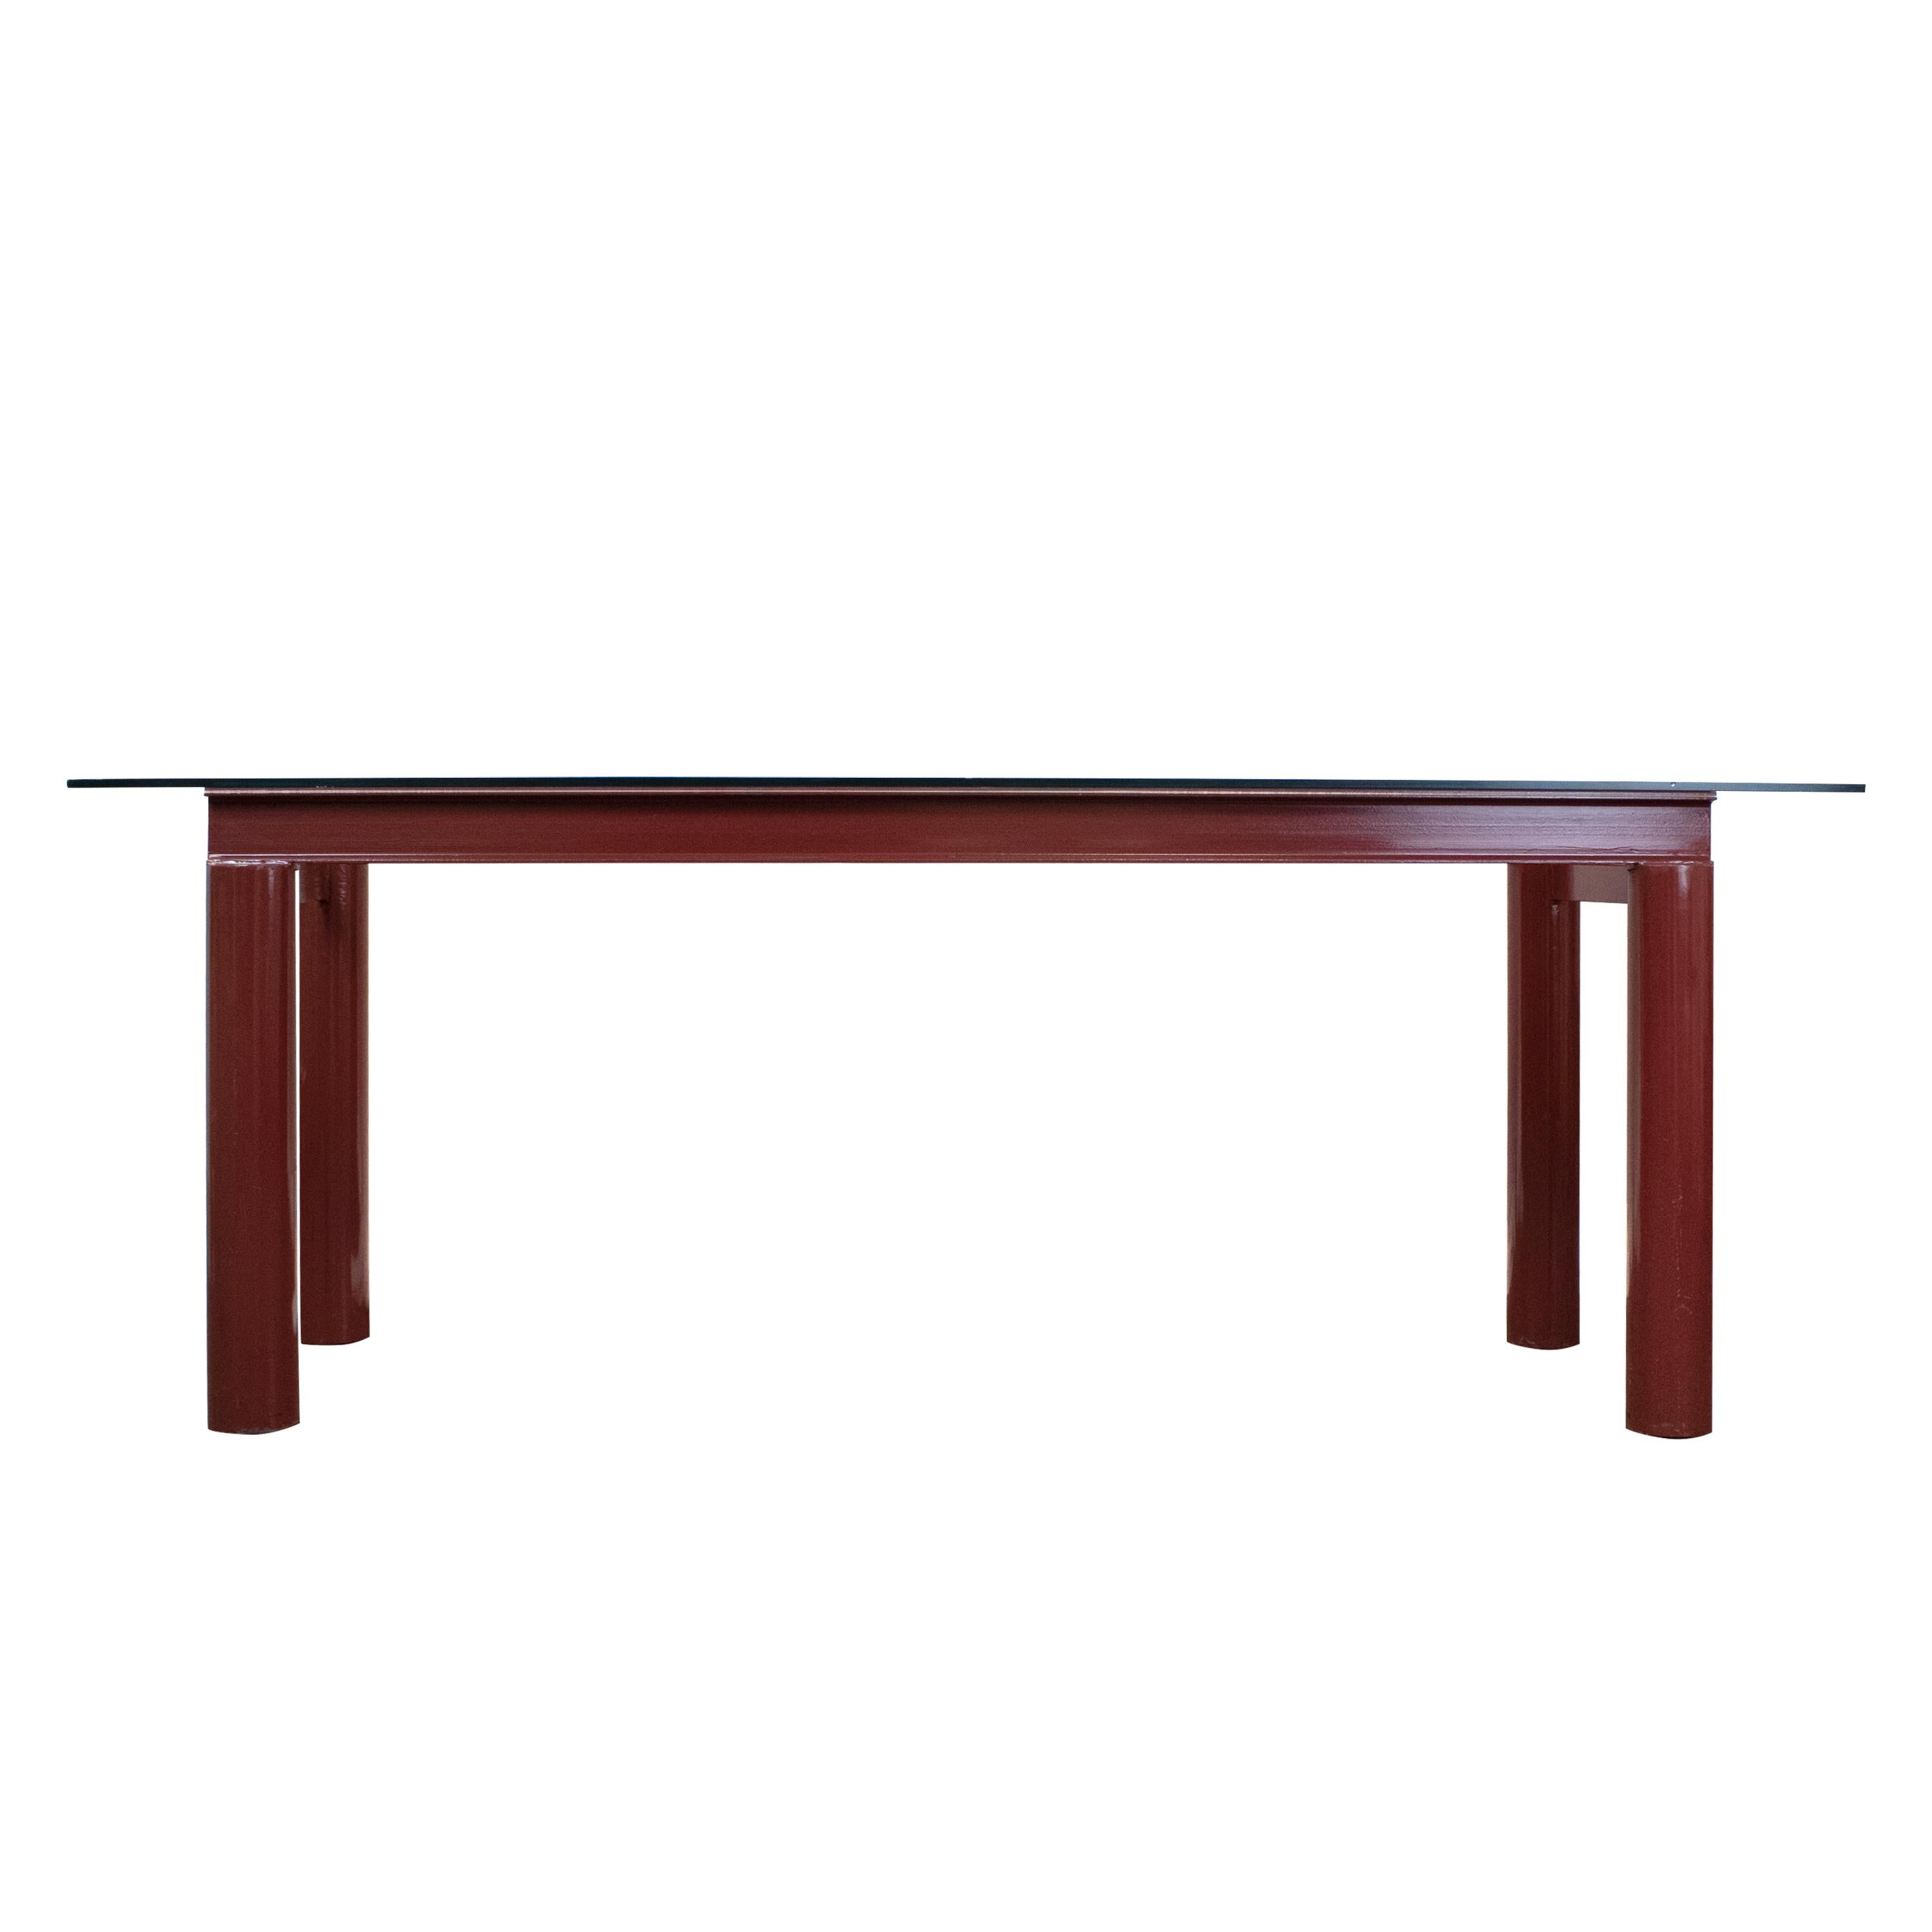 Unique Italian dining table. The table consists of an architectural steel lacquered structure and a rectangular transparent glass top.

The glass can be custom adjusted.